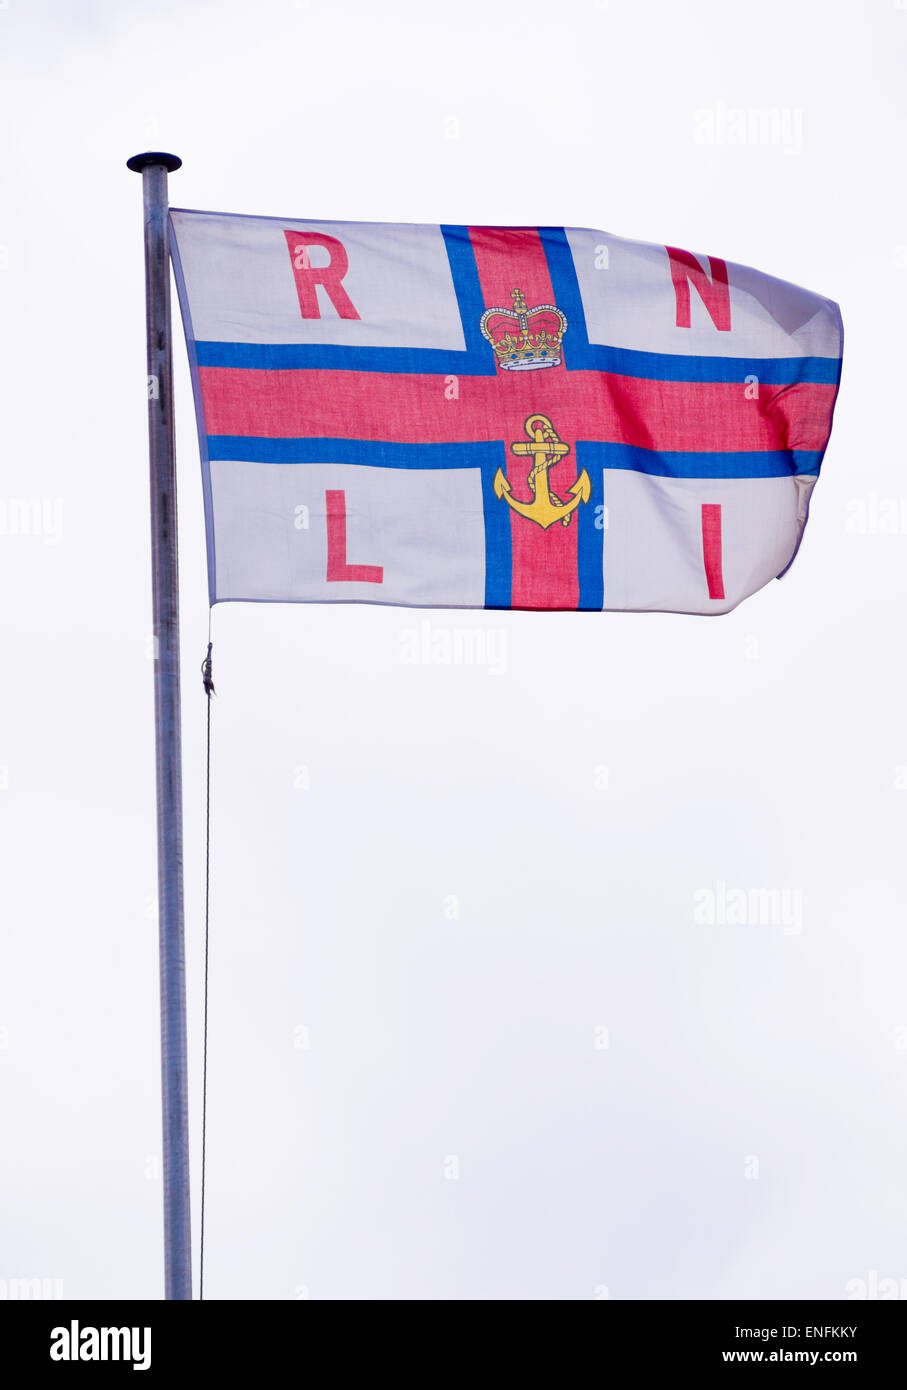 RNLI Royal National Lifeboat Institution Flagge Stockfoto